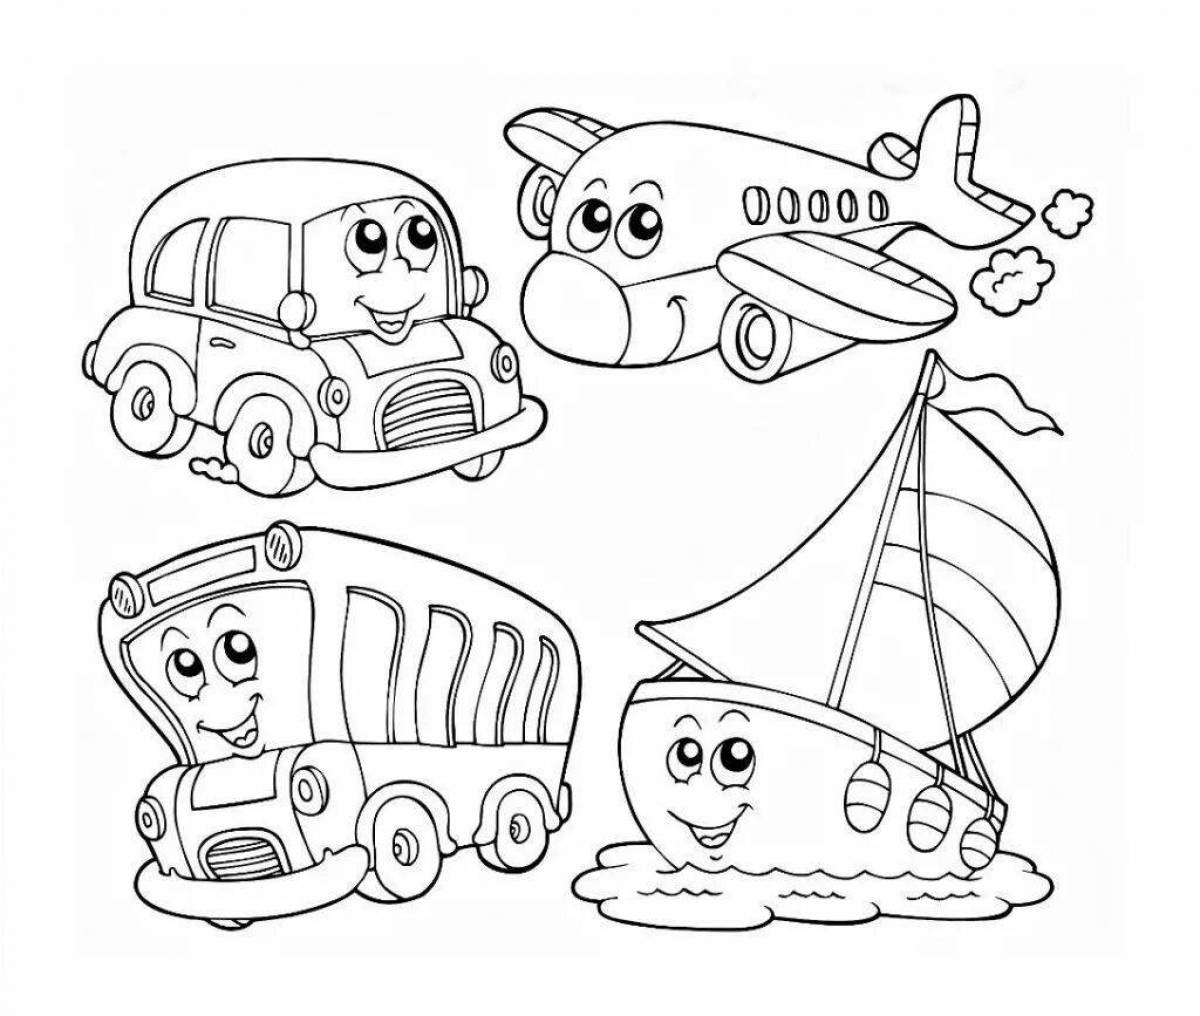 Fun coloring for boys and girls 5 years old